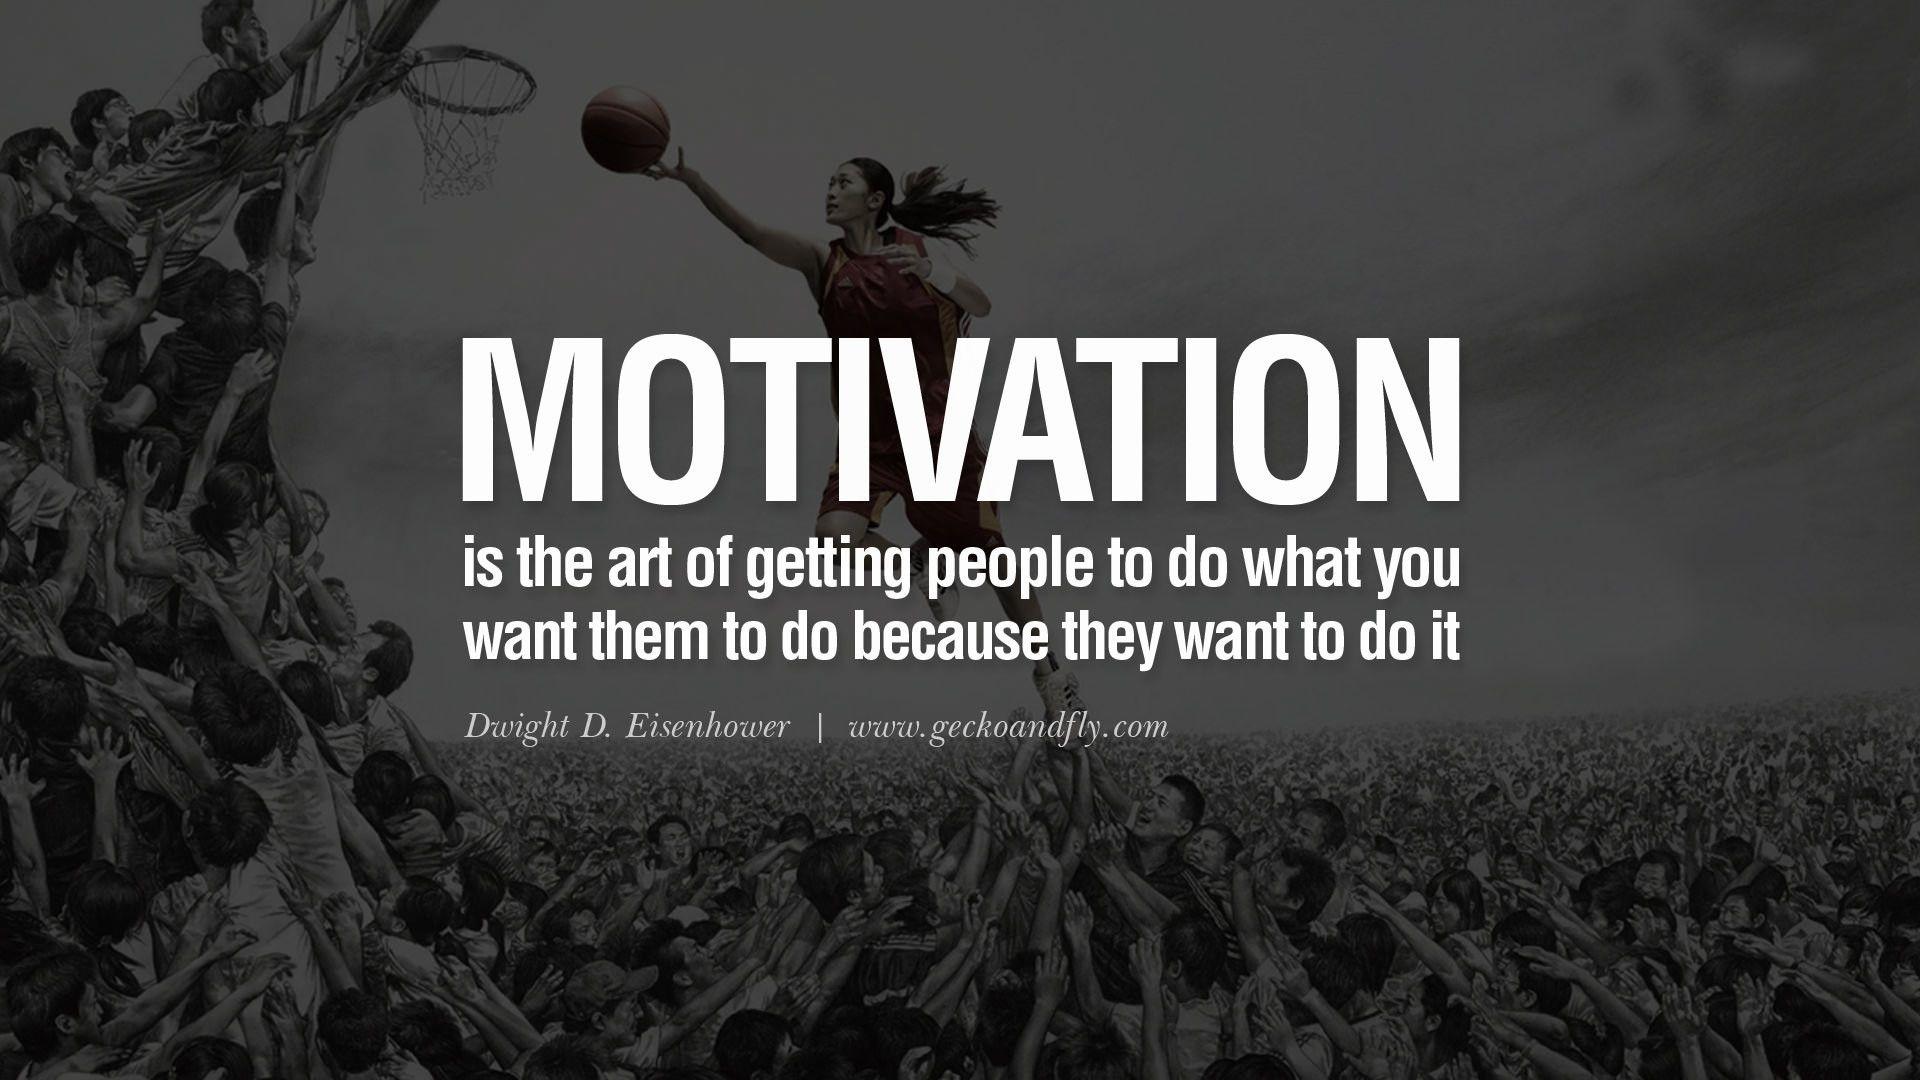 Motivational Sports Wallpapers - Top Free Motivational Sports